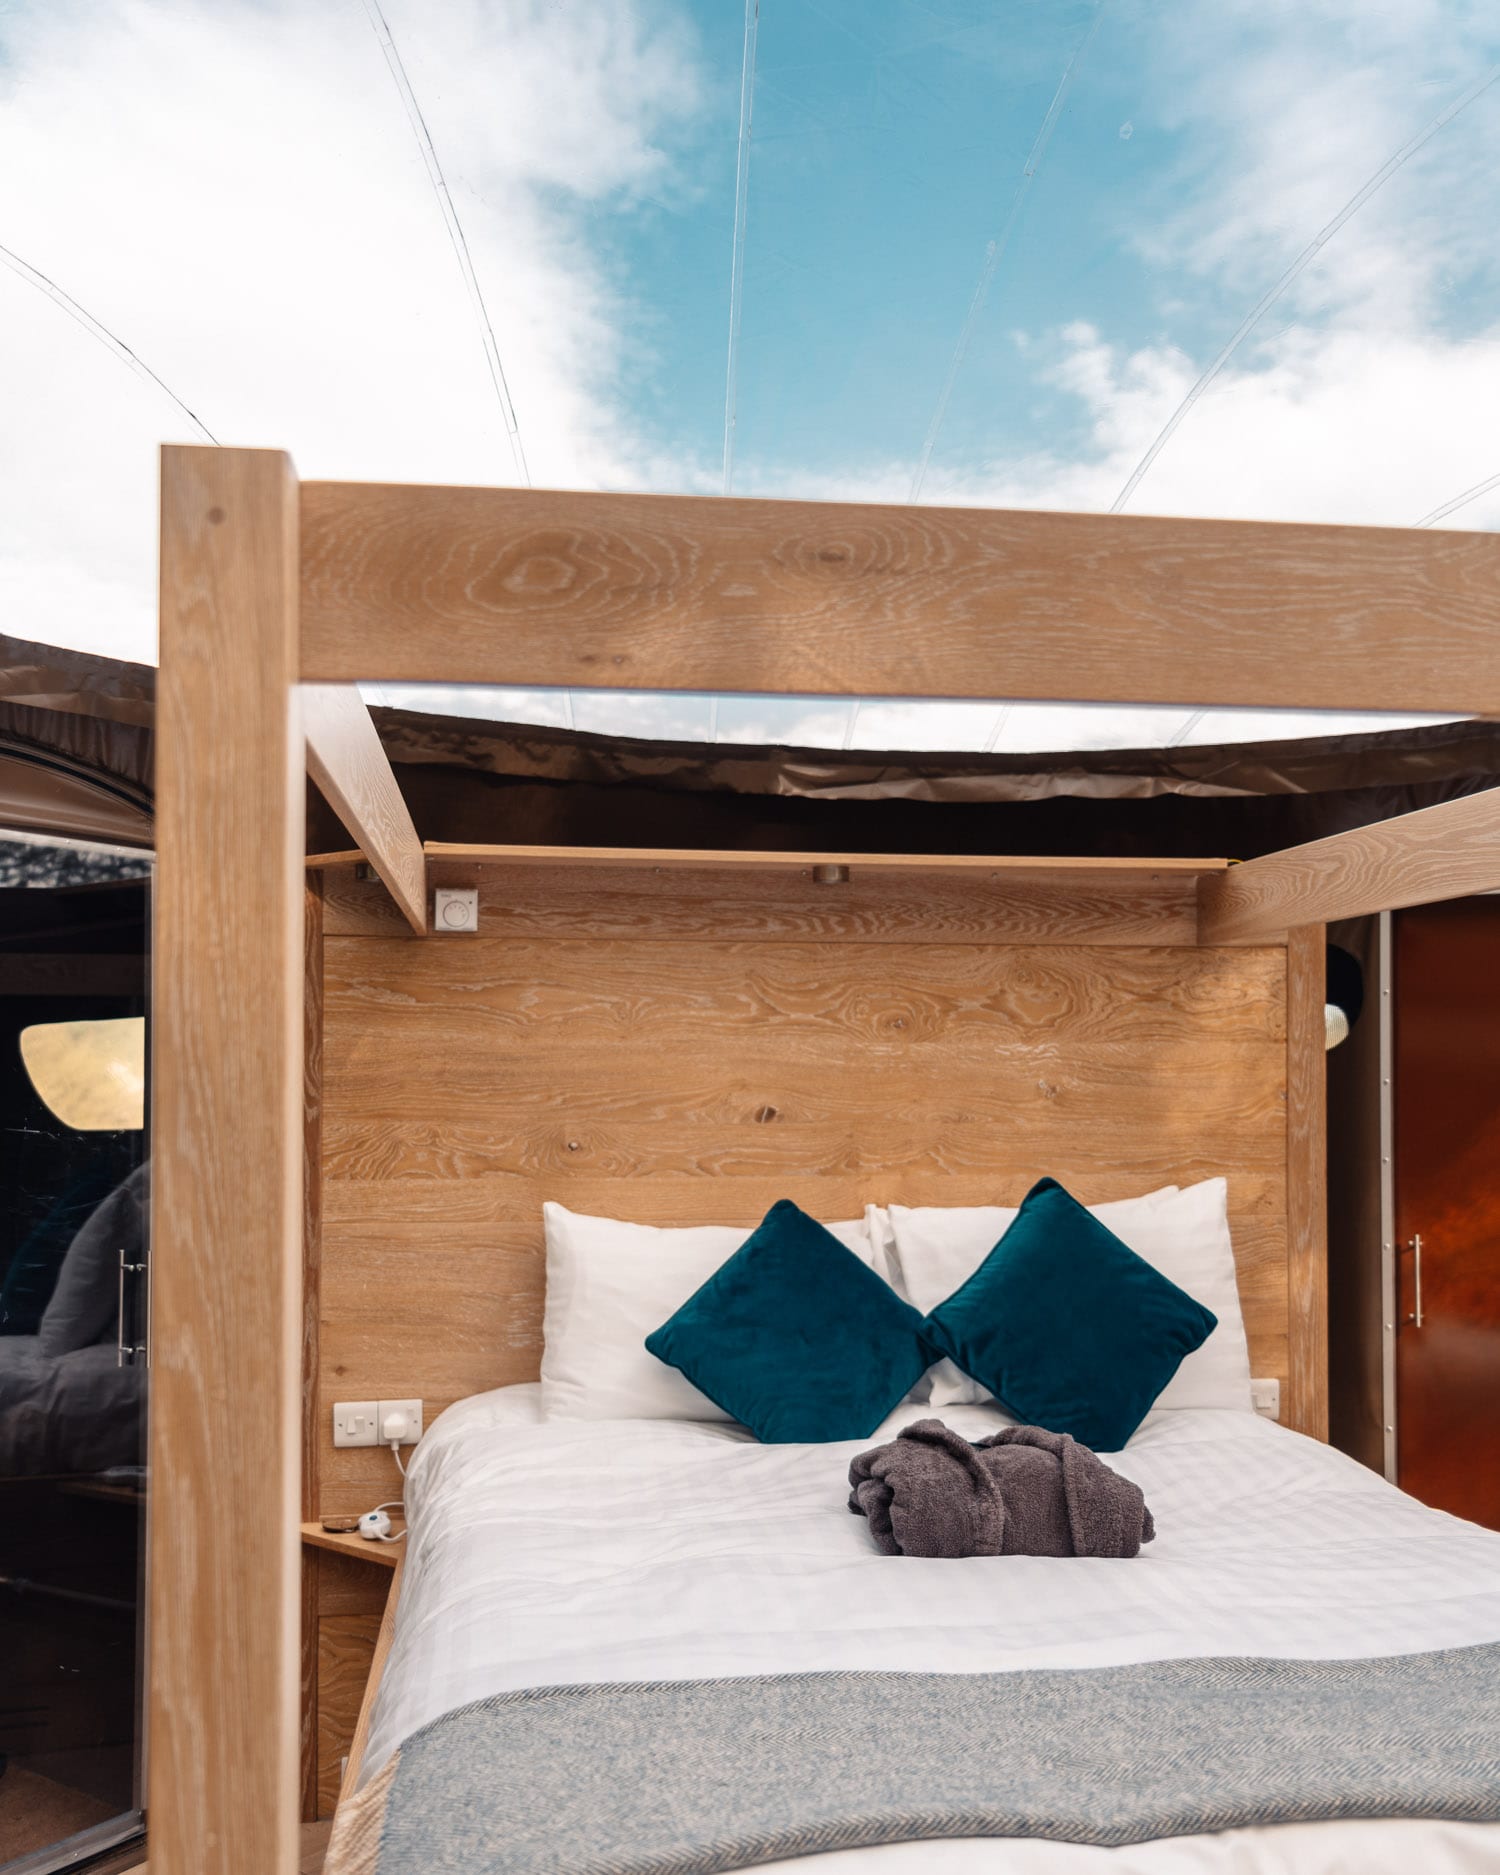 Four-poster Bed at Finn Lough Bubble Domes Hotel in Northern Ireland